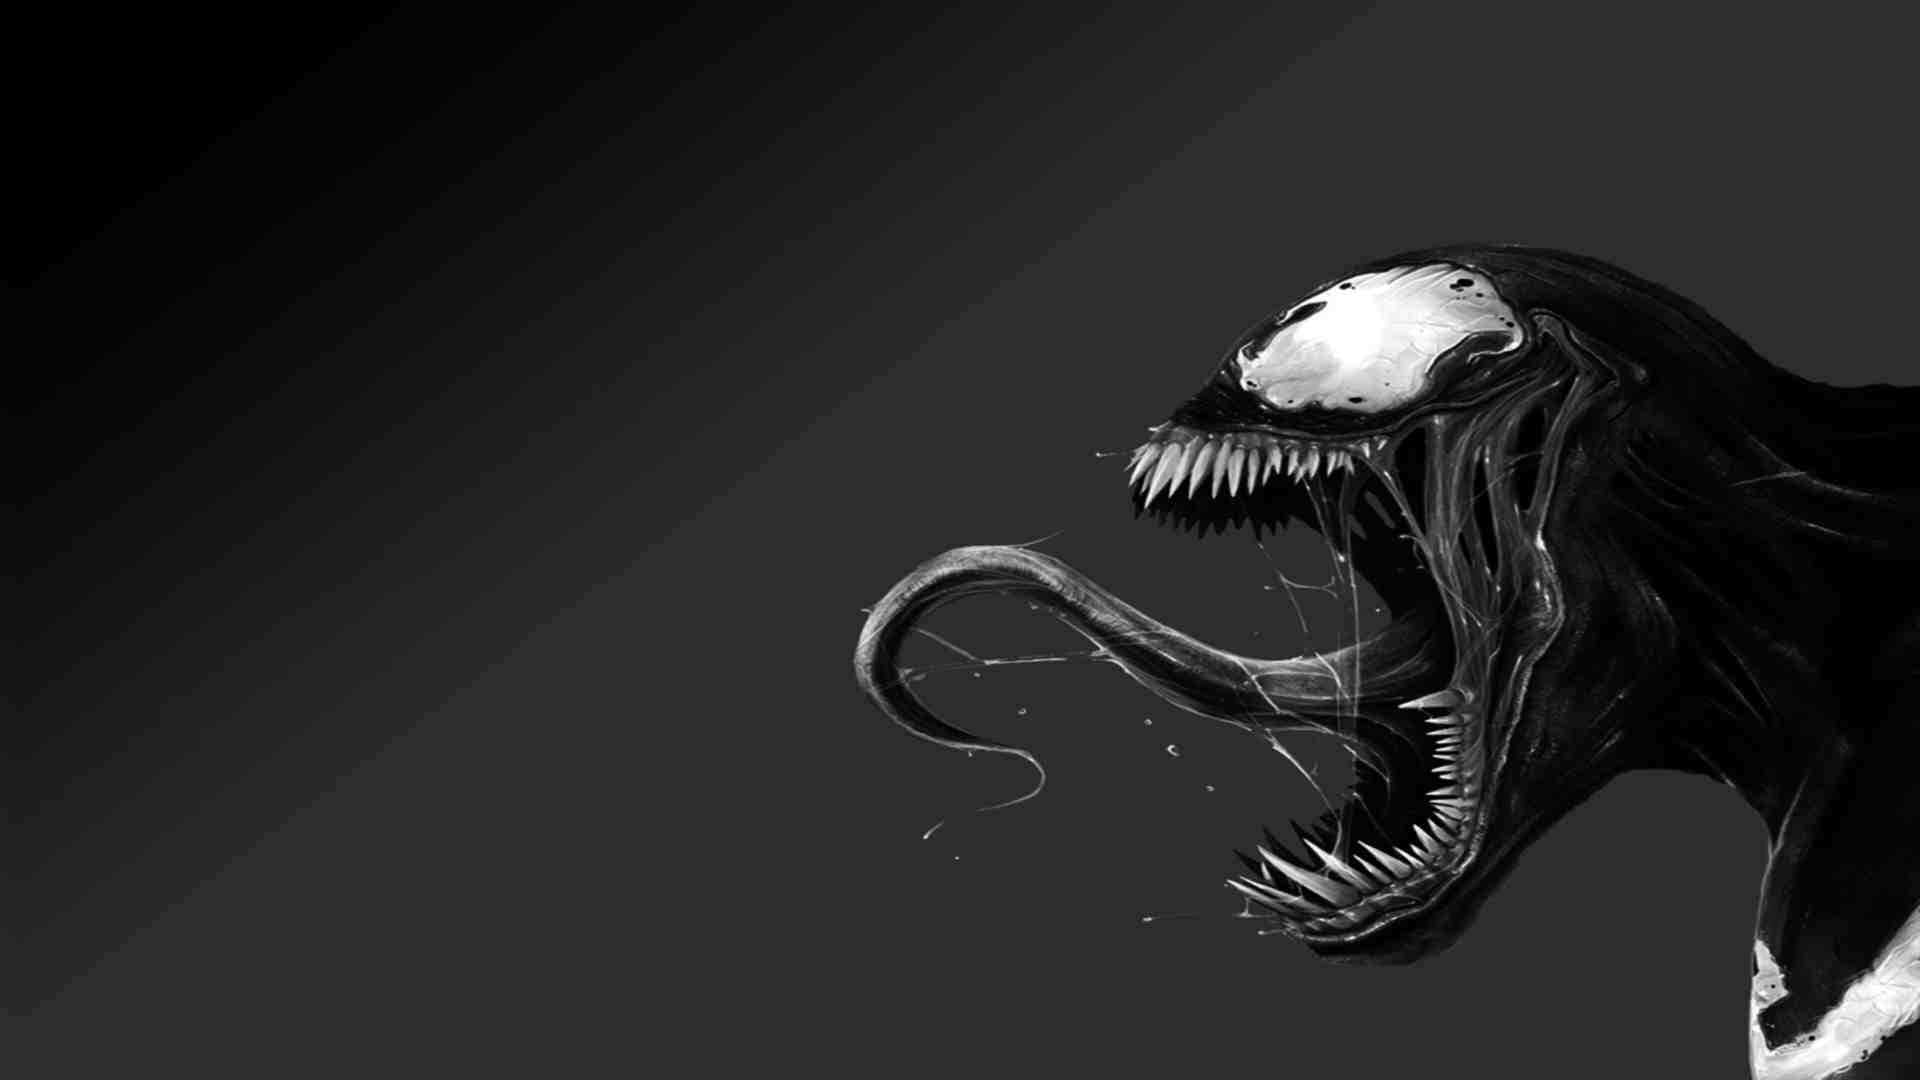 Black Venom With Tongue Out Wallpaper